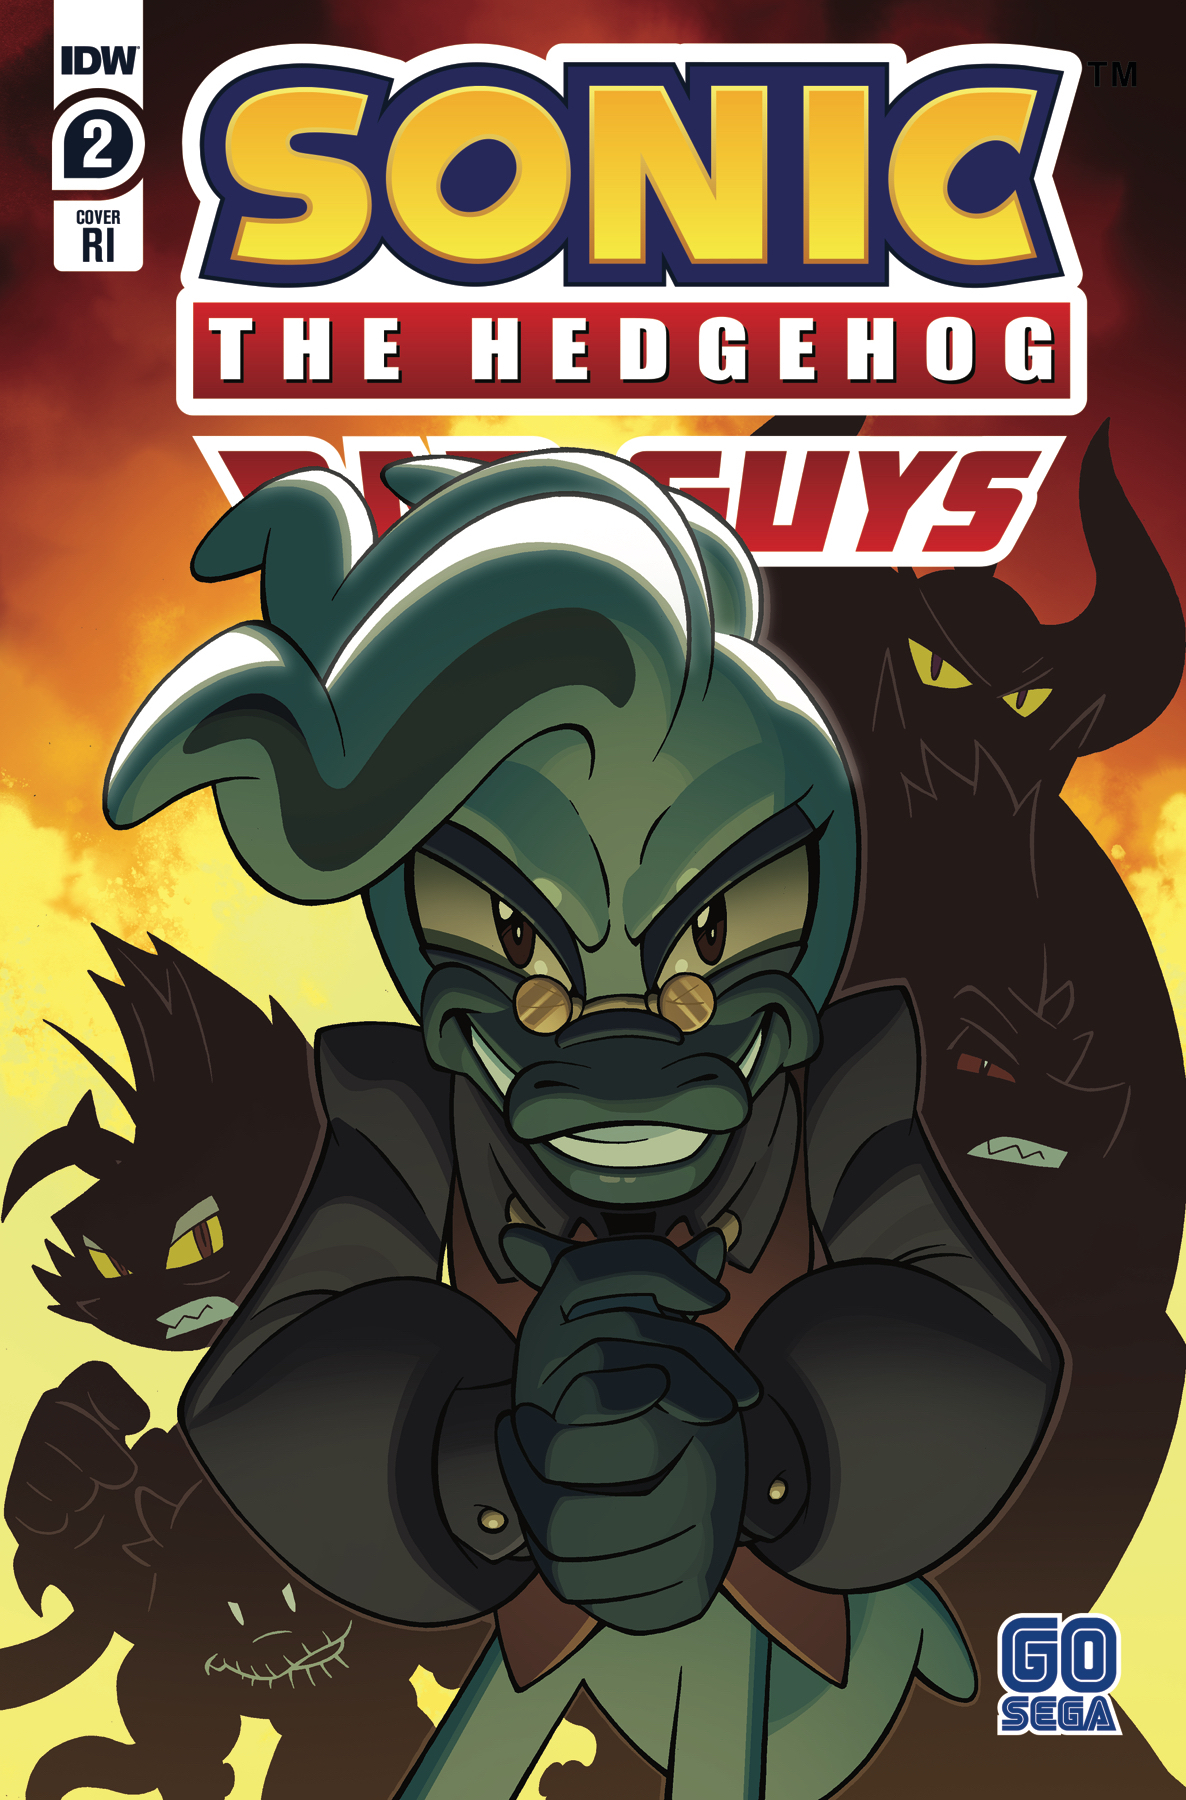 Sonic the Hedgehog Bad Guys #2 1 for 10 Incentive Lawrence (Of 4)